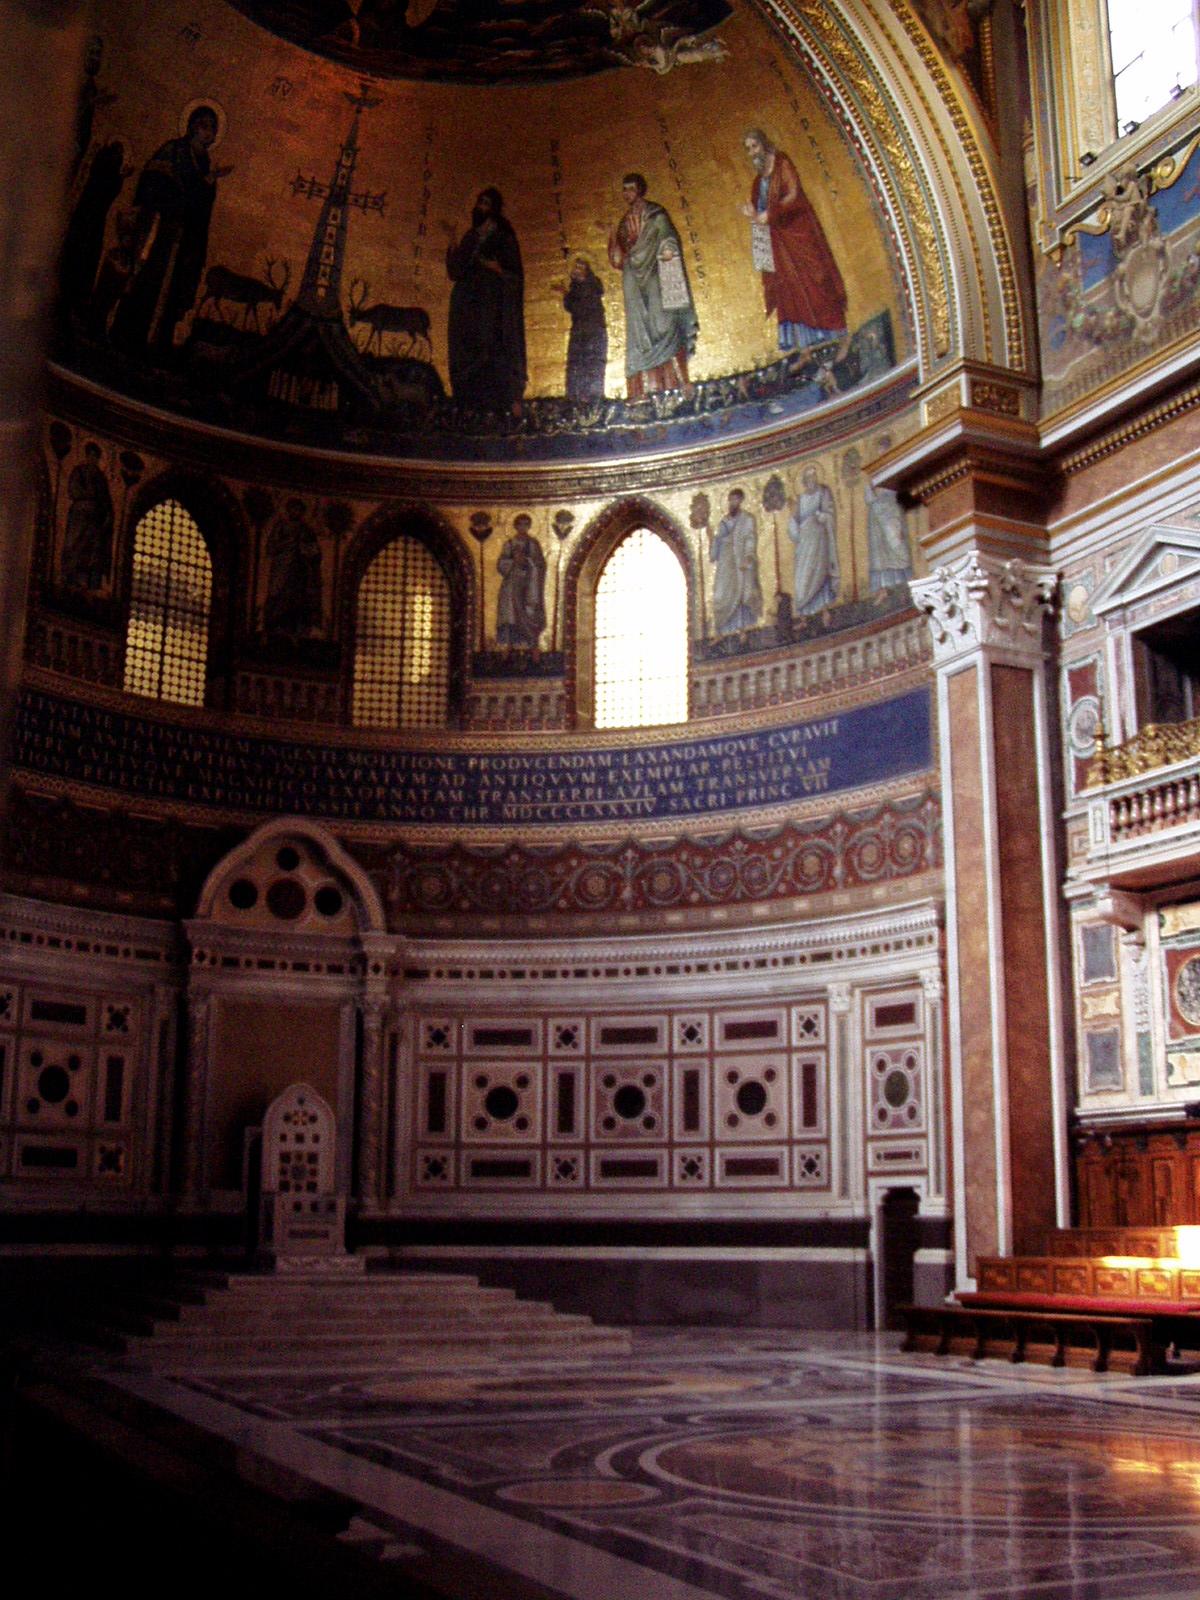 The Chair of the Bishop of Rome at the Basilica of St. John Lateran. (Image from Stock.Exchng)